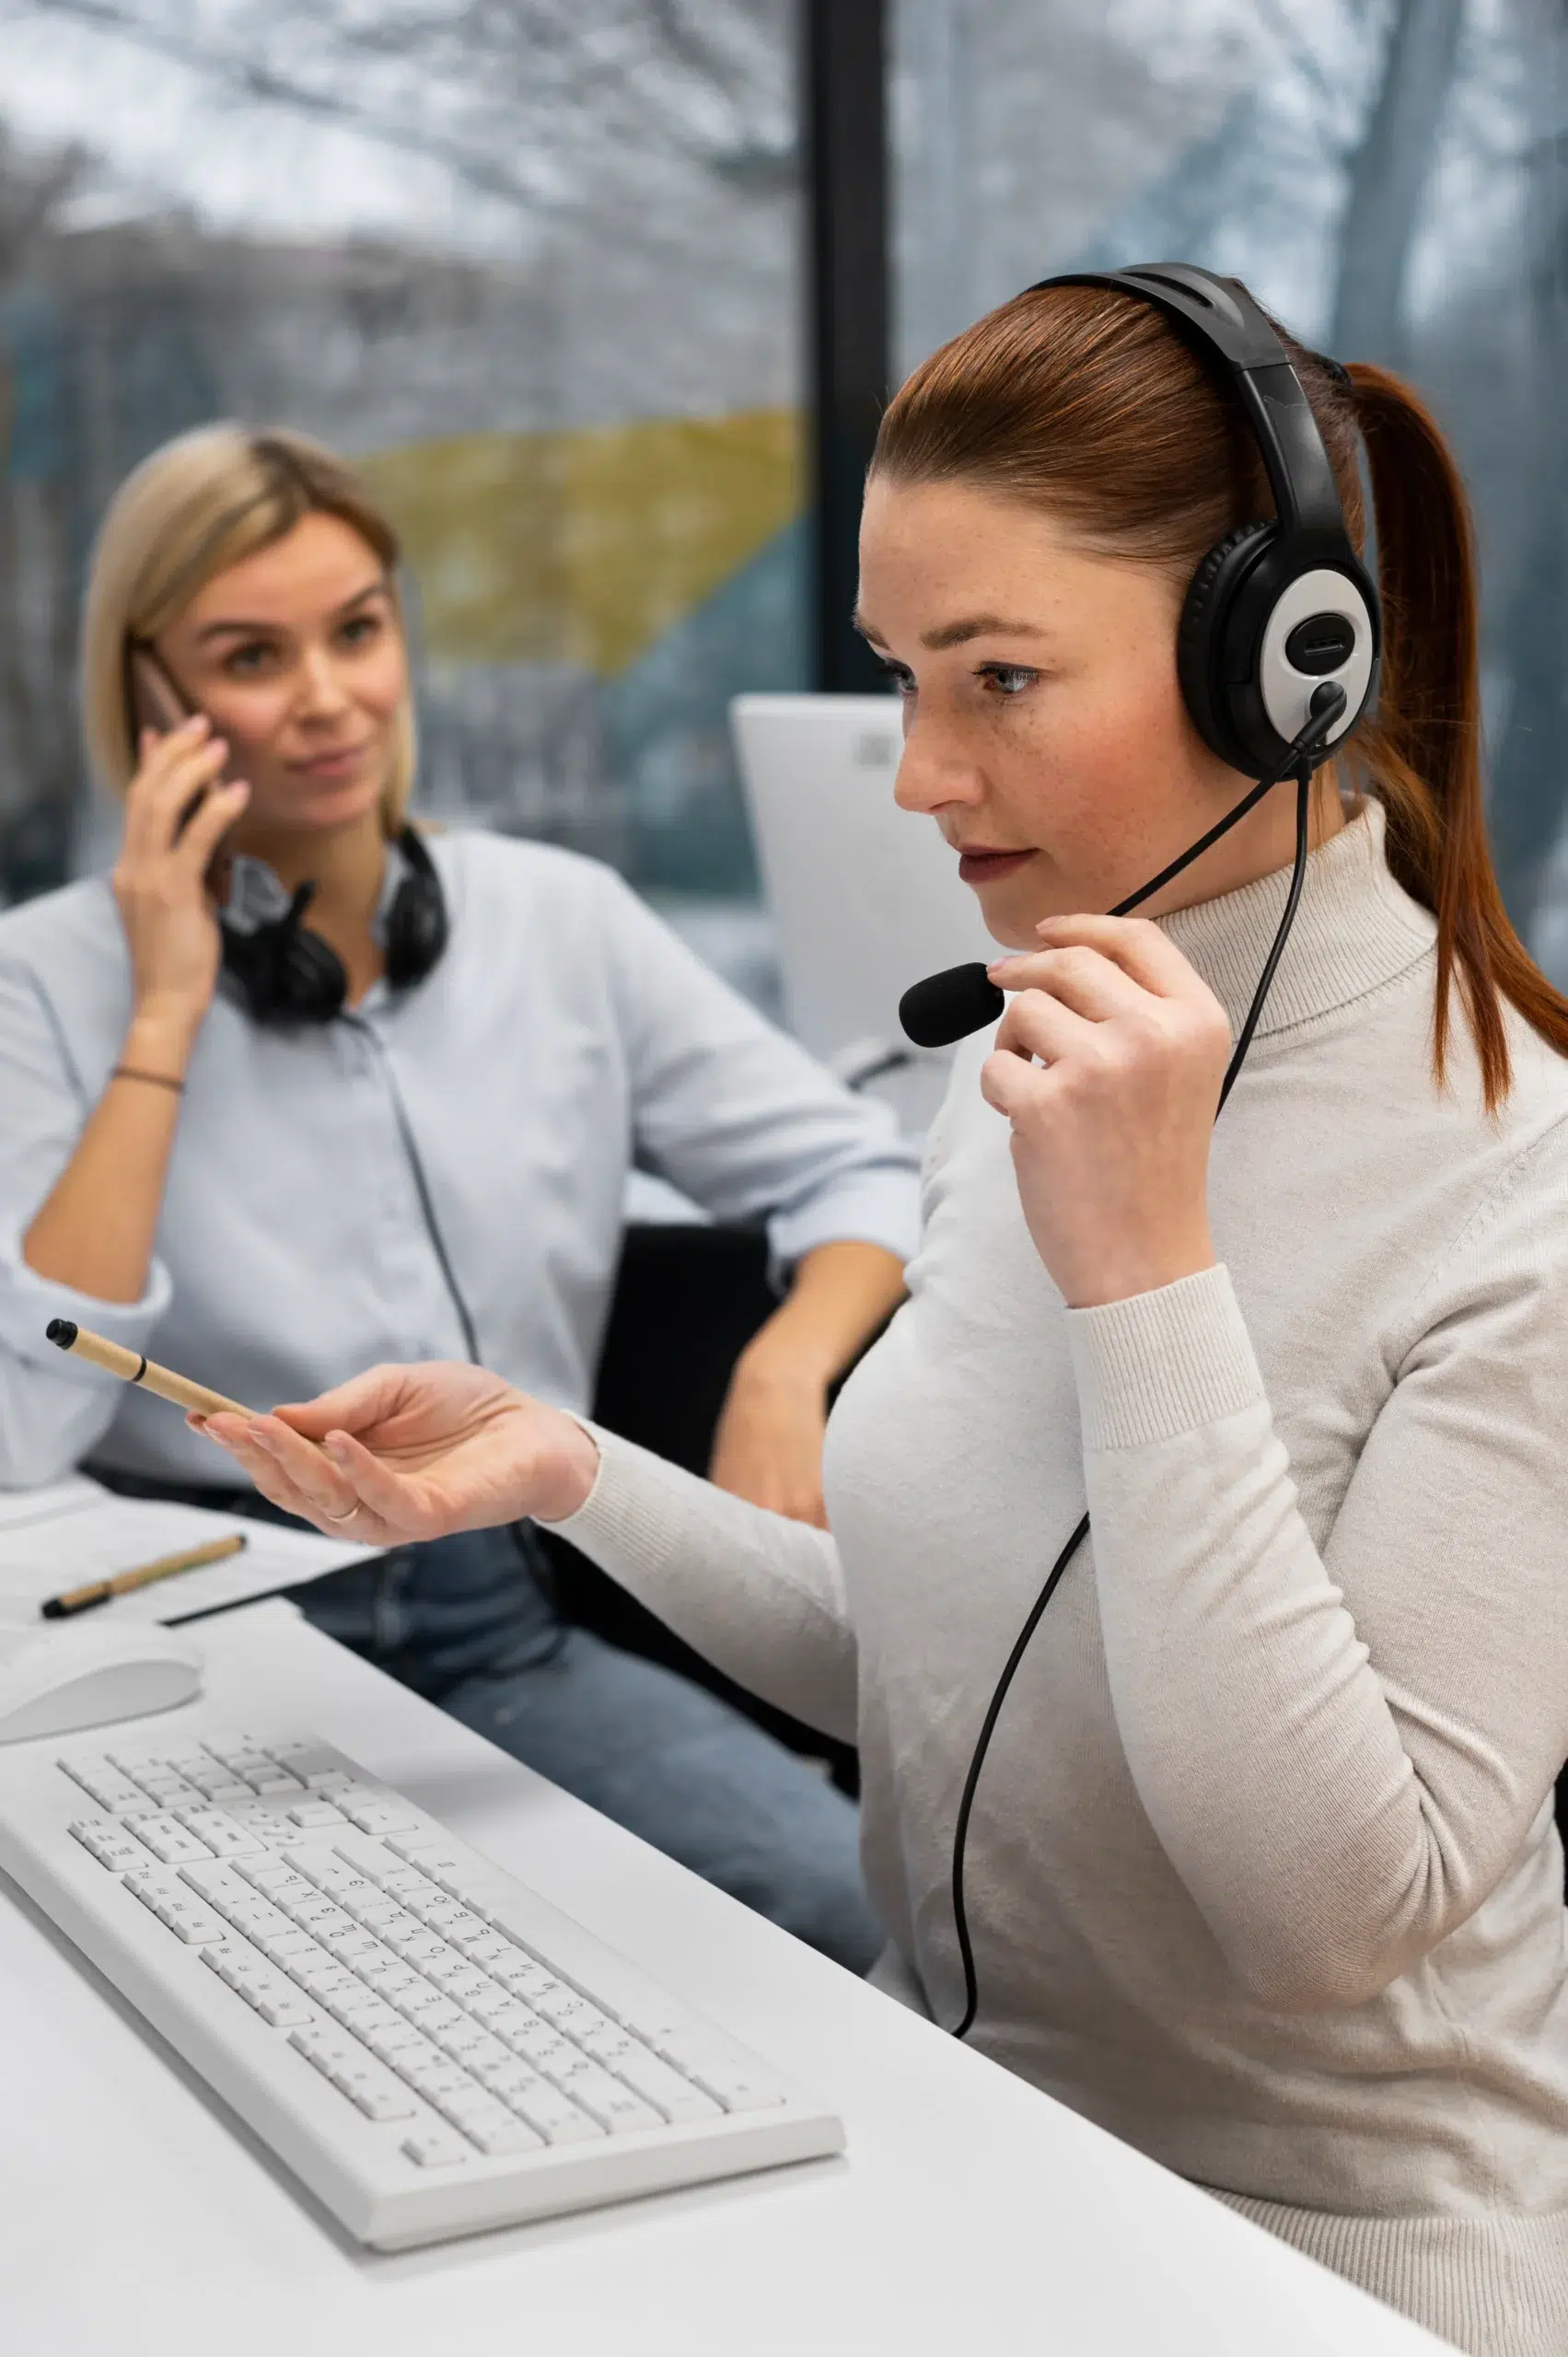 A female employee providing online support by using headset and mic